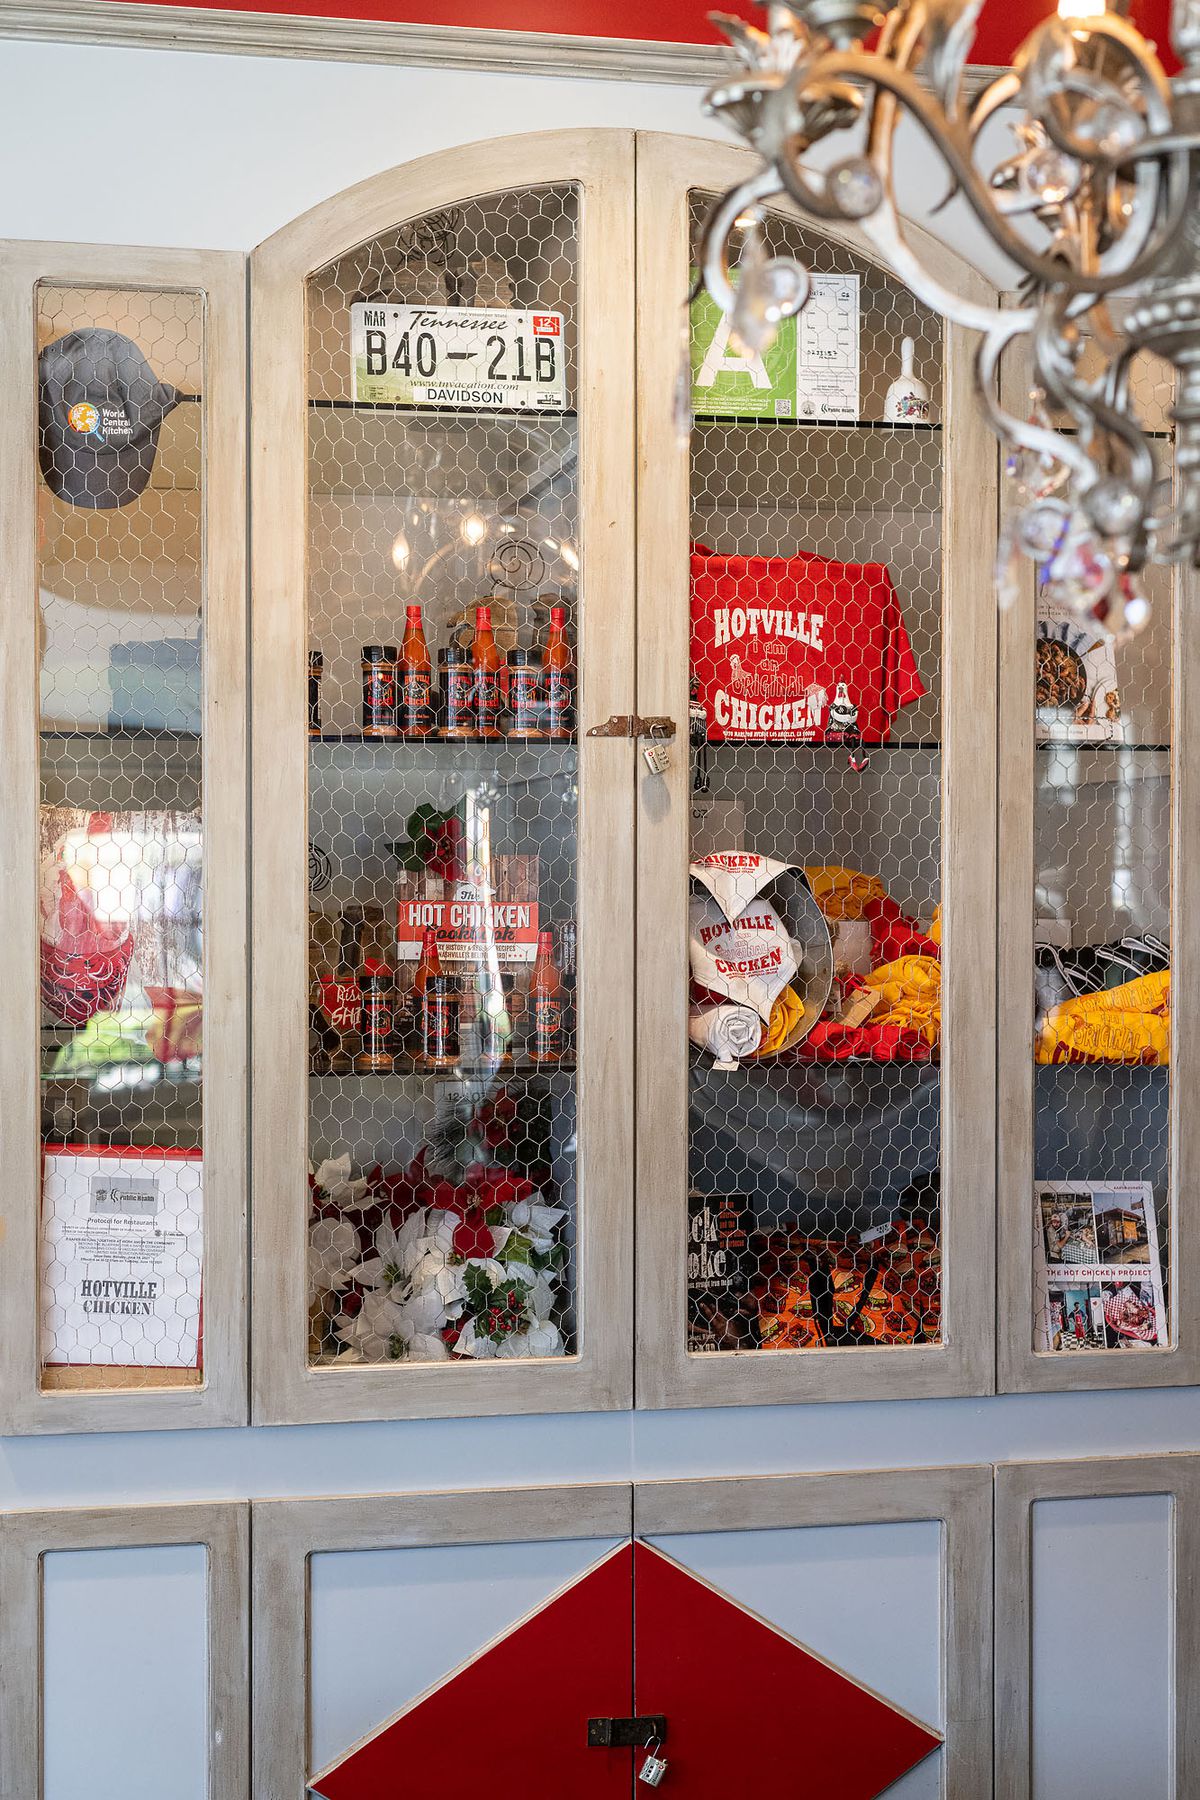 A glass display case holds Hotville merchandise like T-shirts, hot sauces, hats, and more.